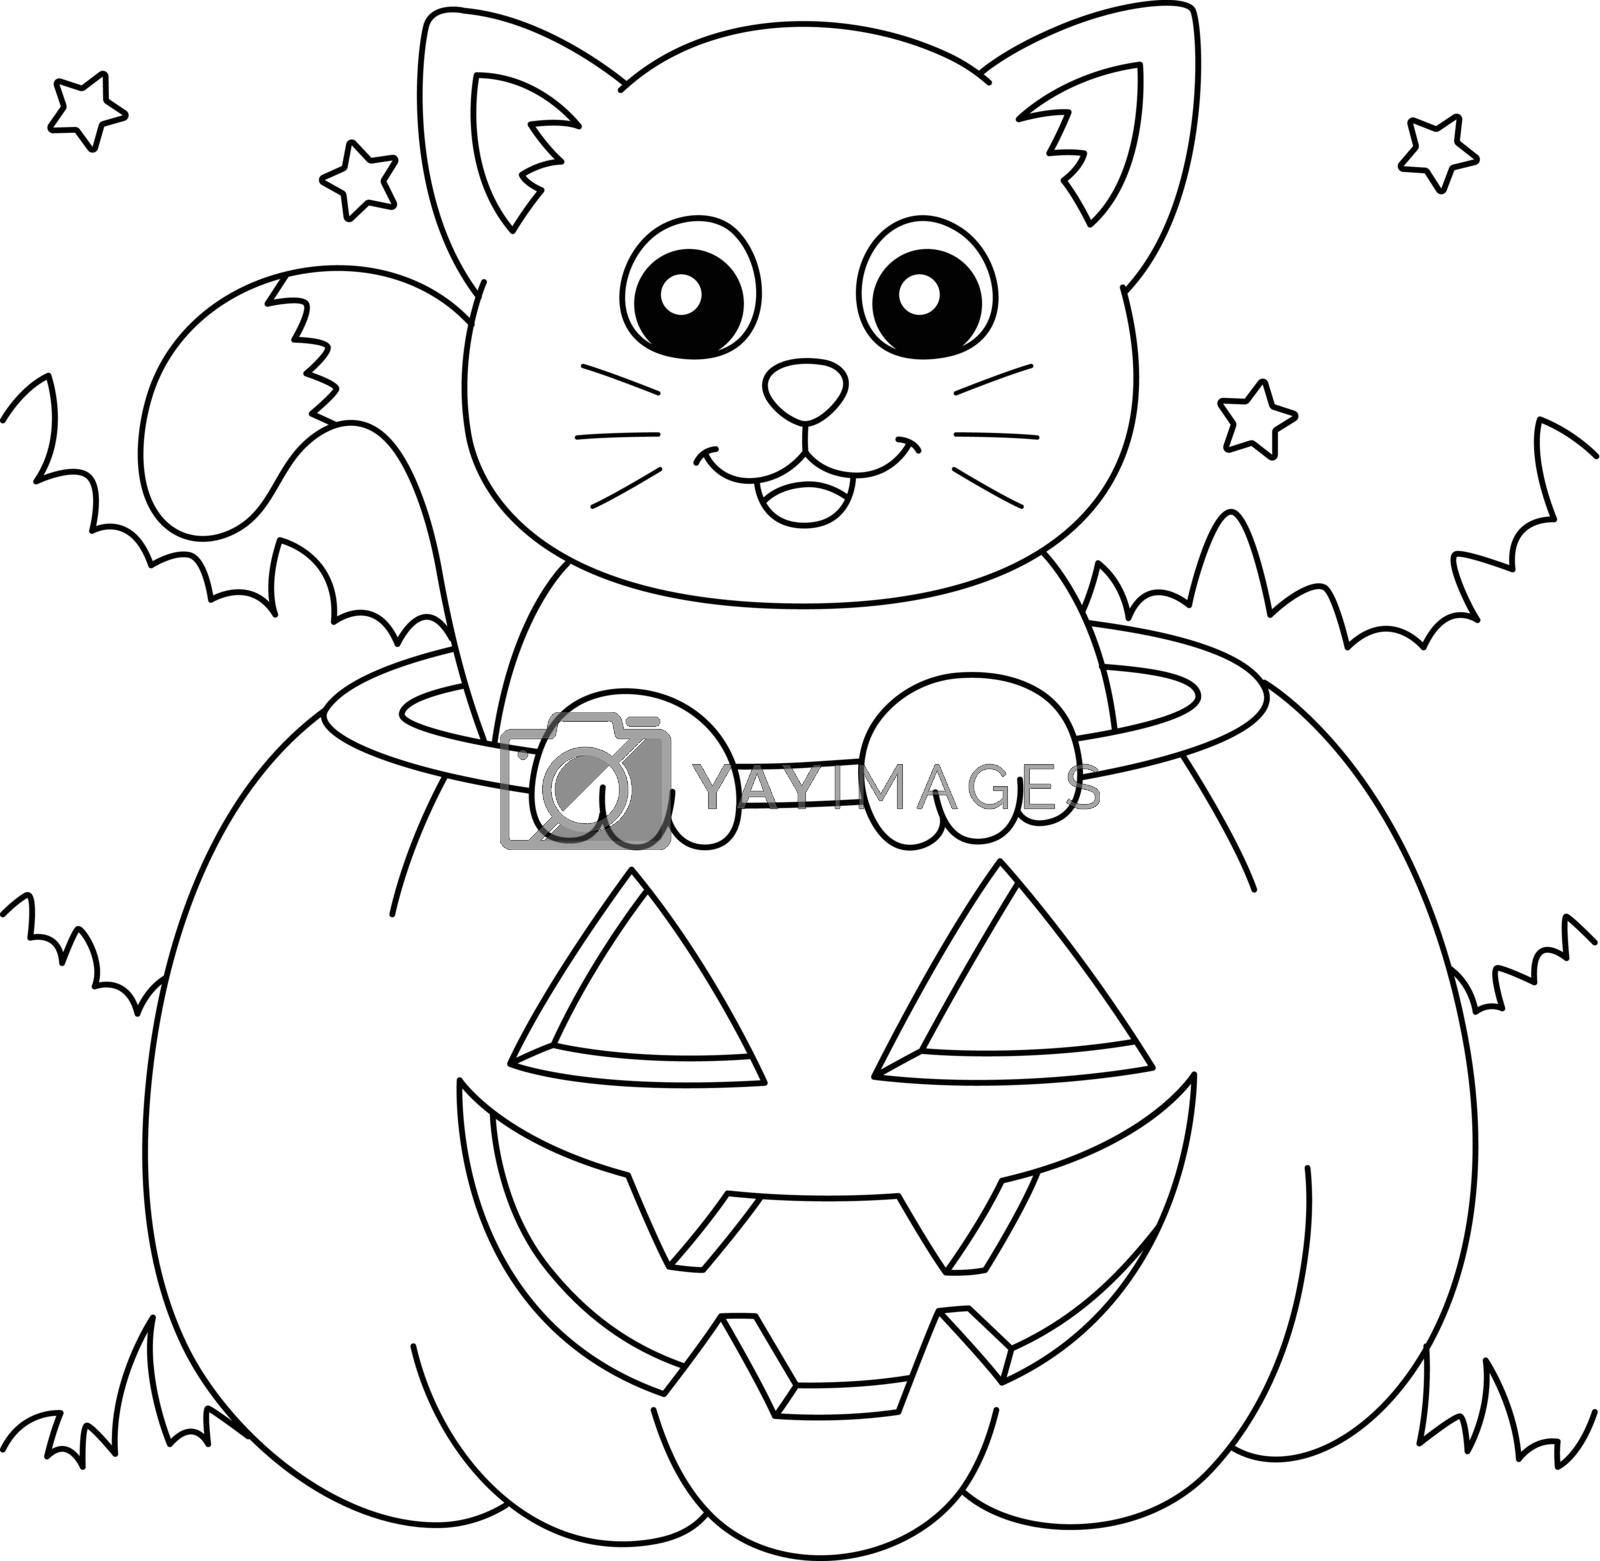 Royalty free image of Pumpkin Cat Halloween Coloring Page for Kids by abbydesign